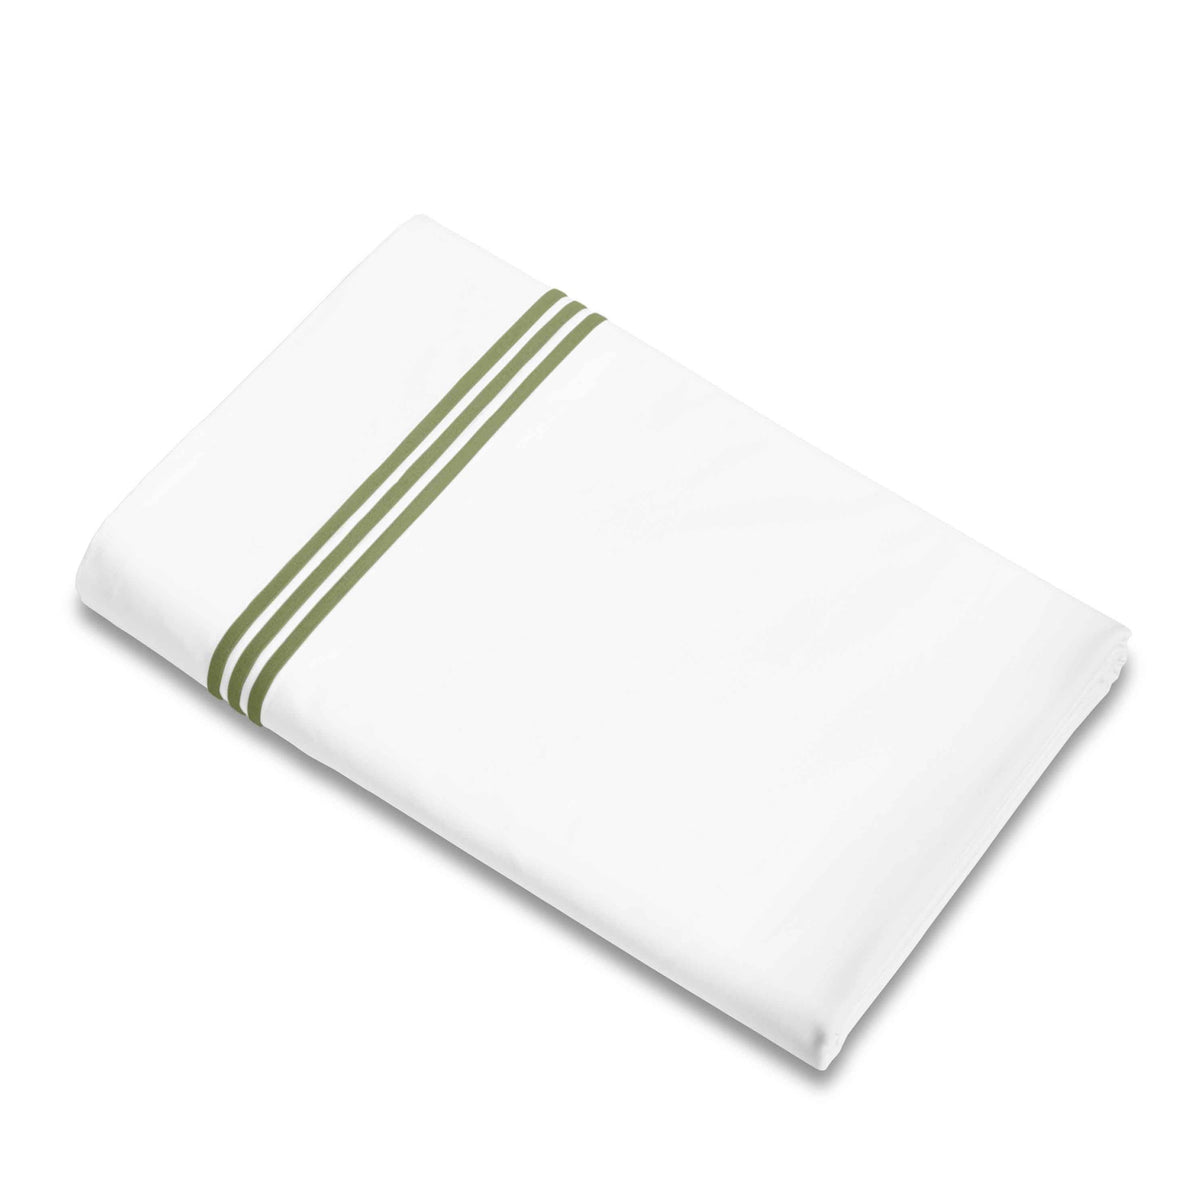 Flat Sheet of Signoria Platinum Percale Bedding in White/Moss Green Color